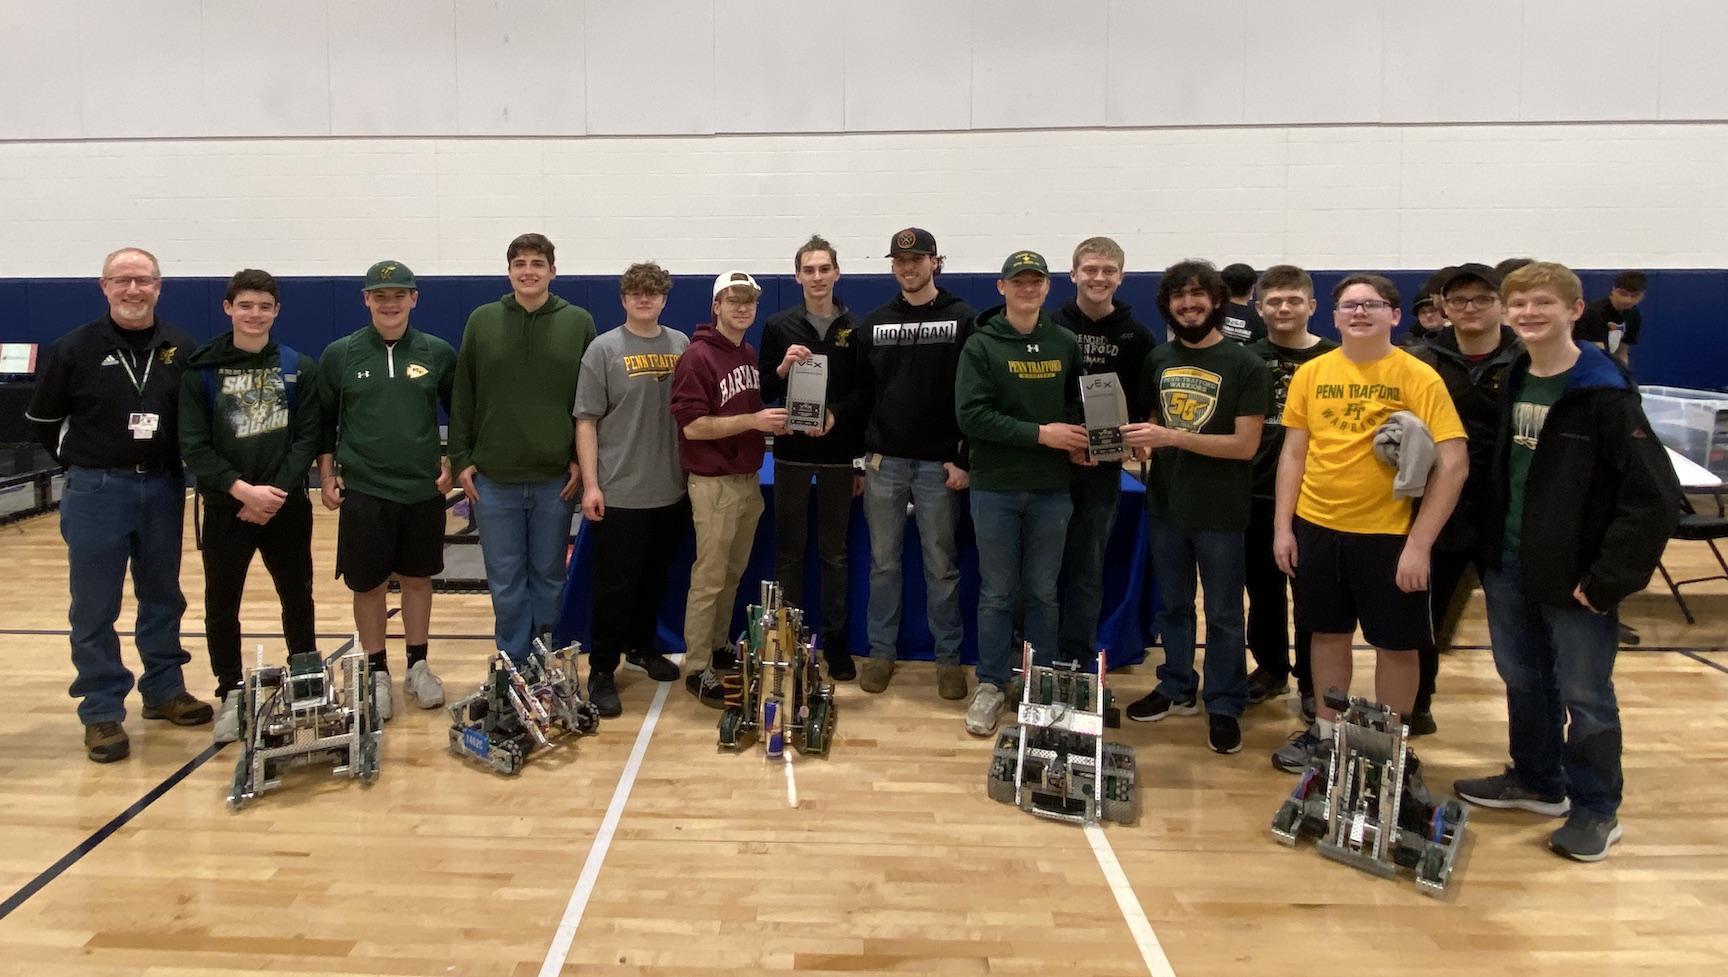 The five Penn-Trafford teams with their robots